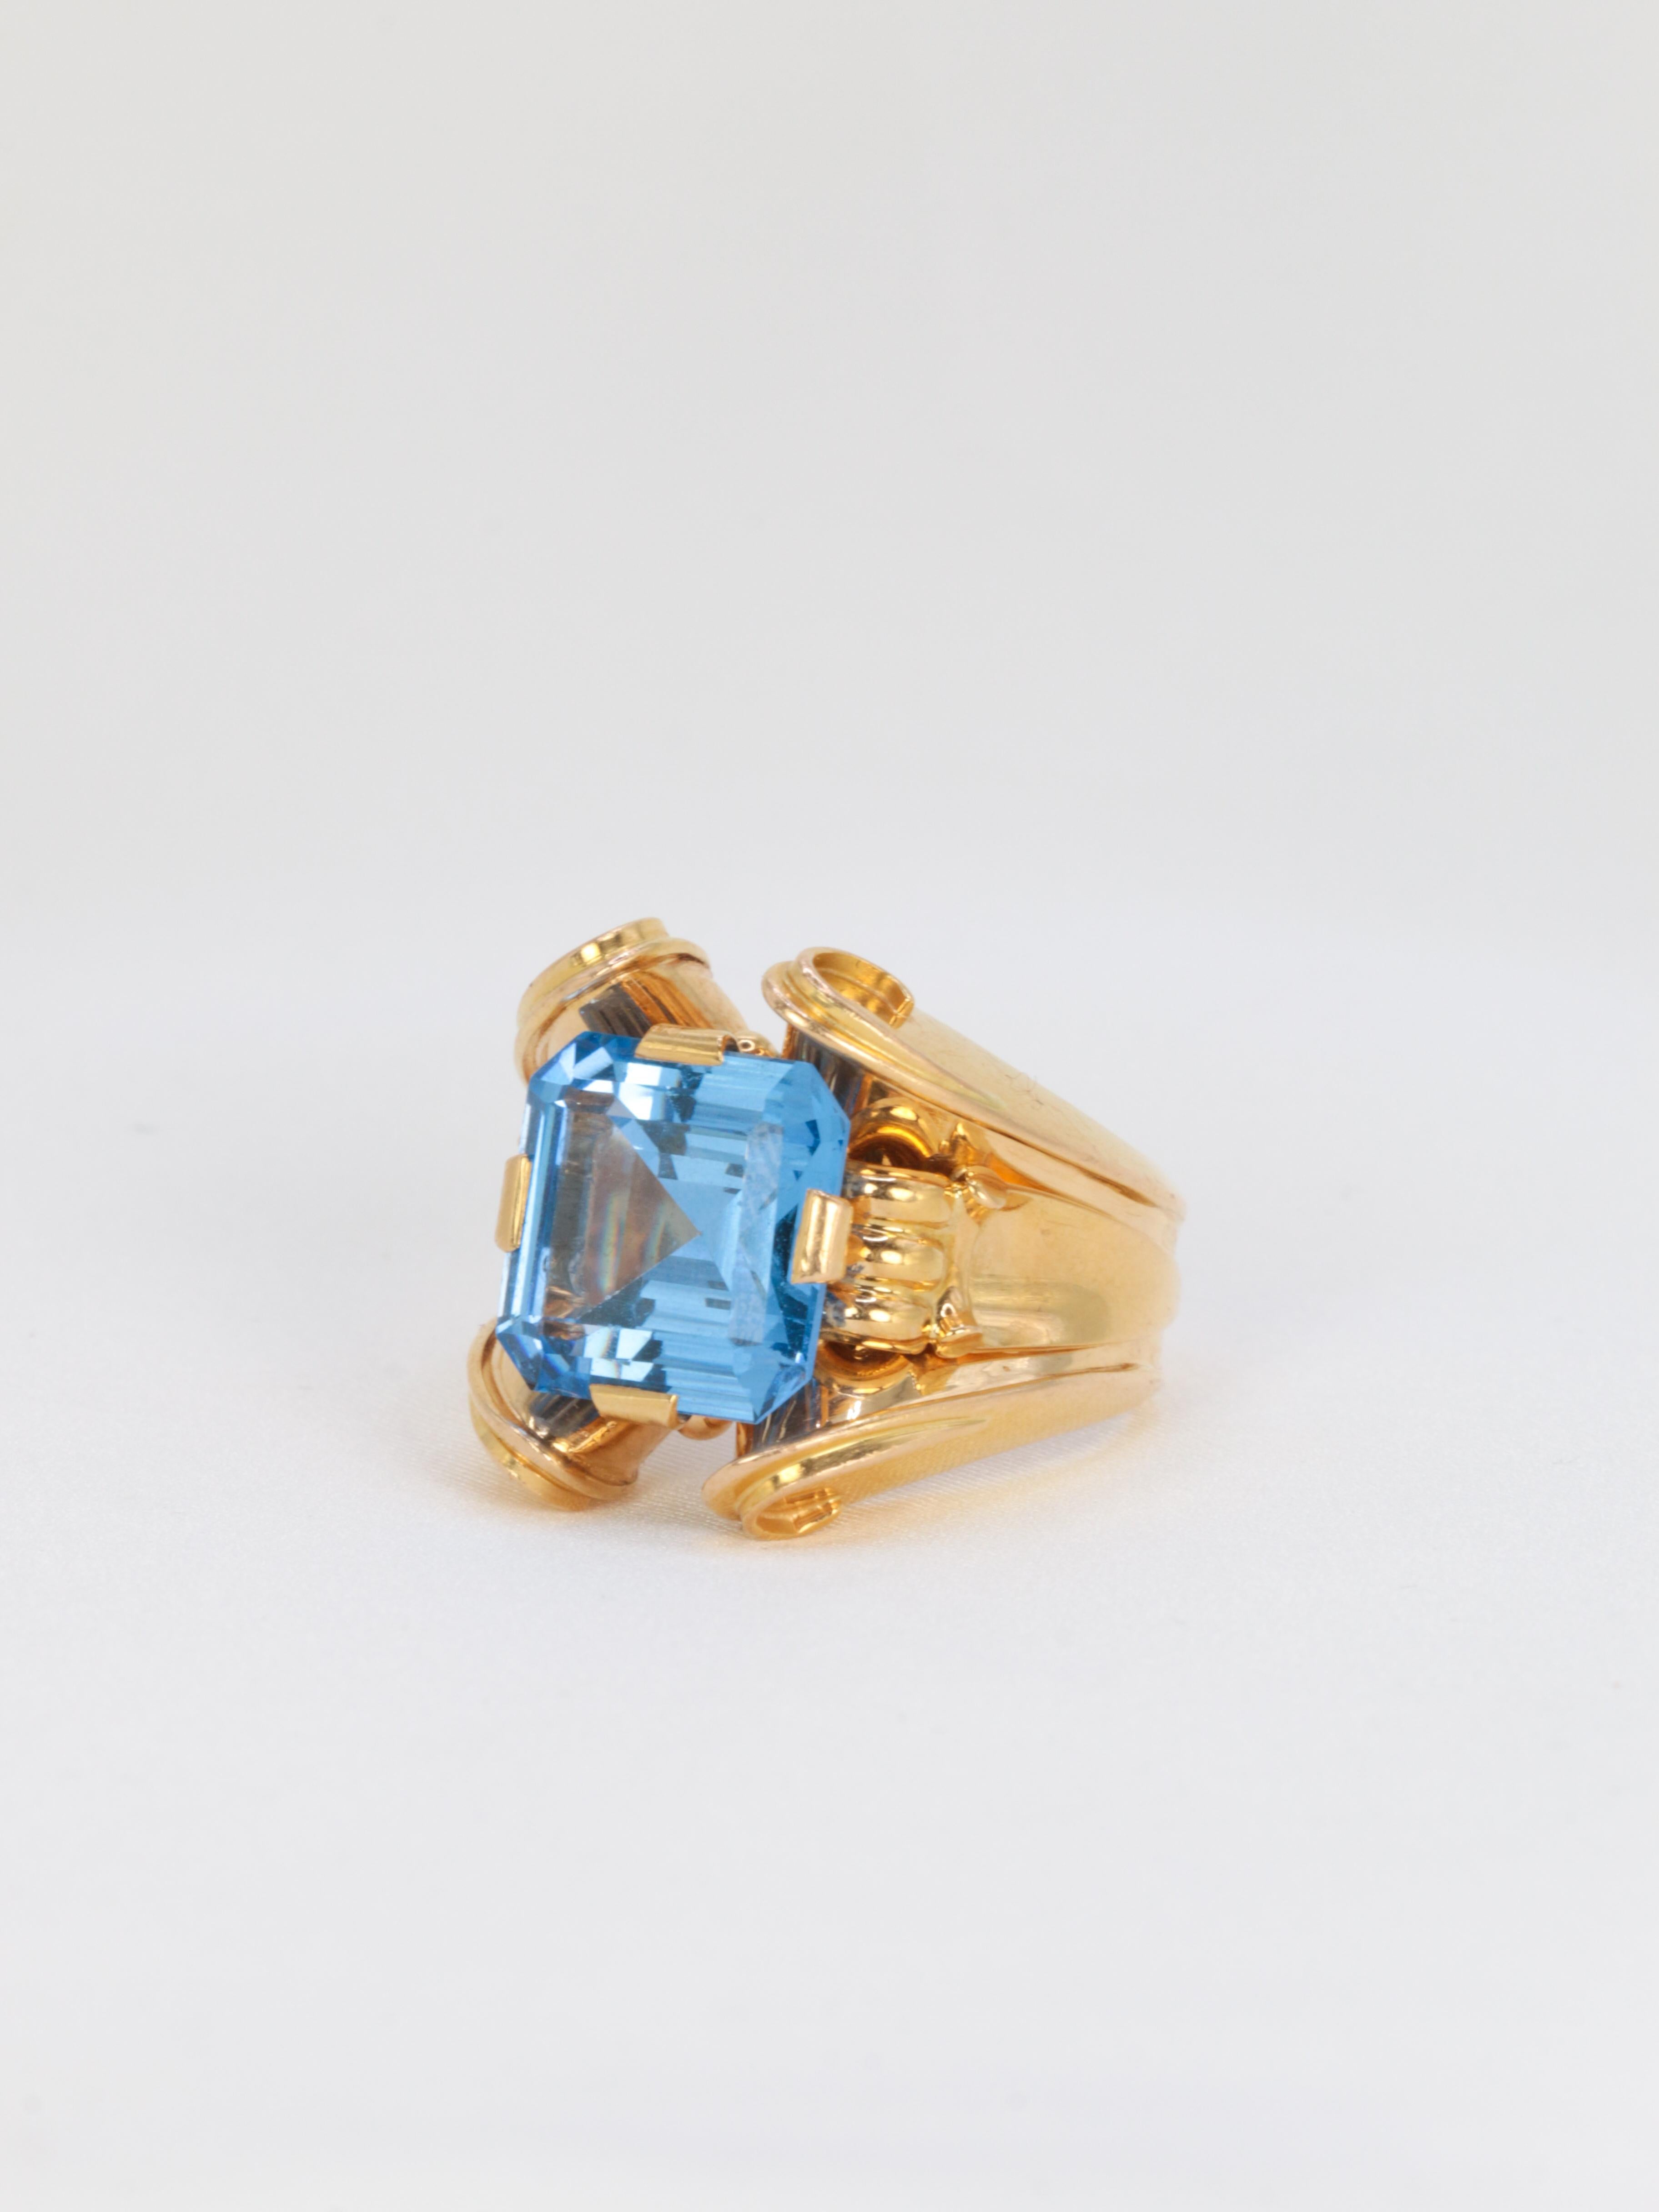 Women's Gold Vintage Cocktail Ring Set with a Blue Stone